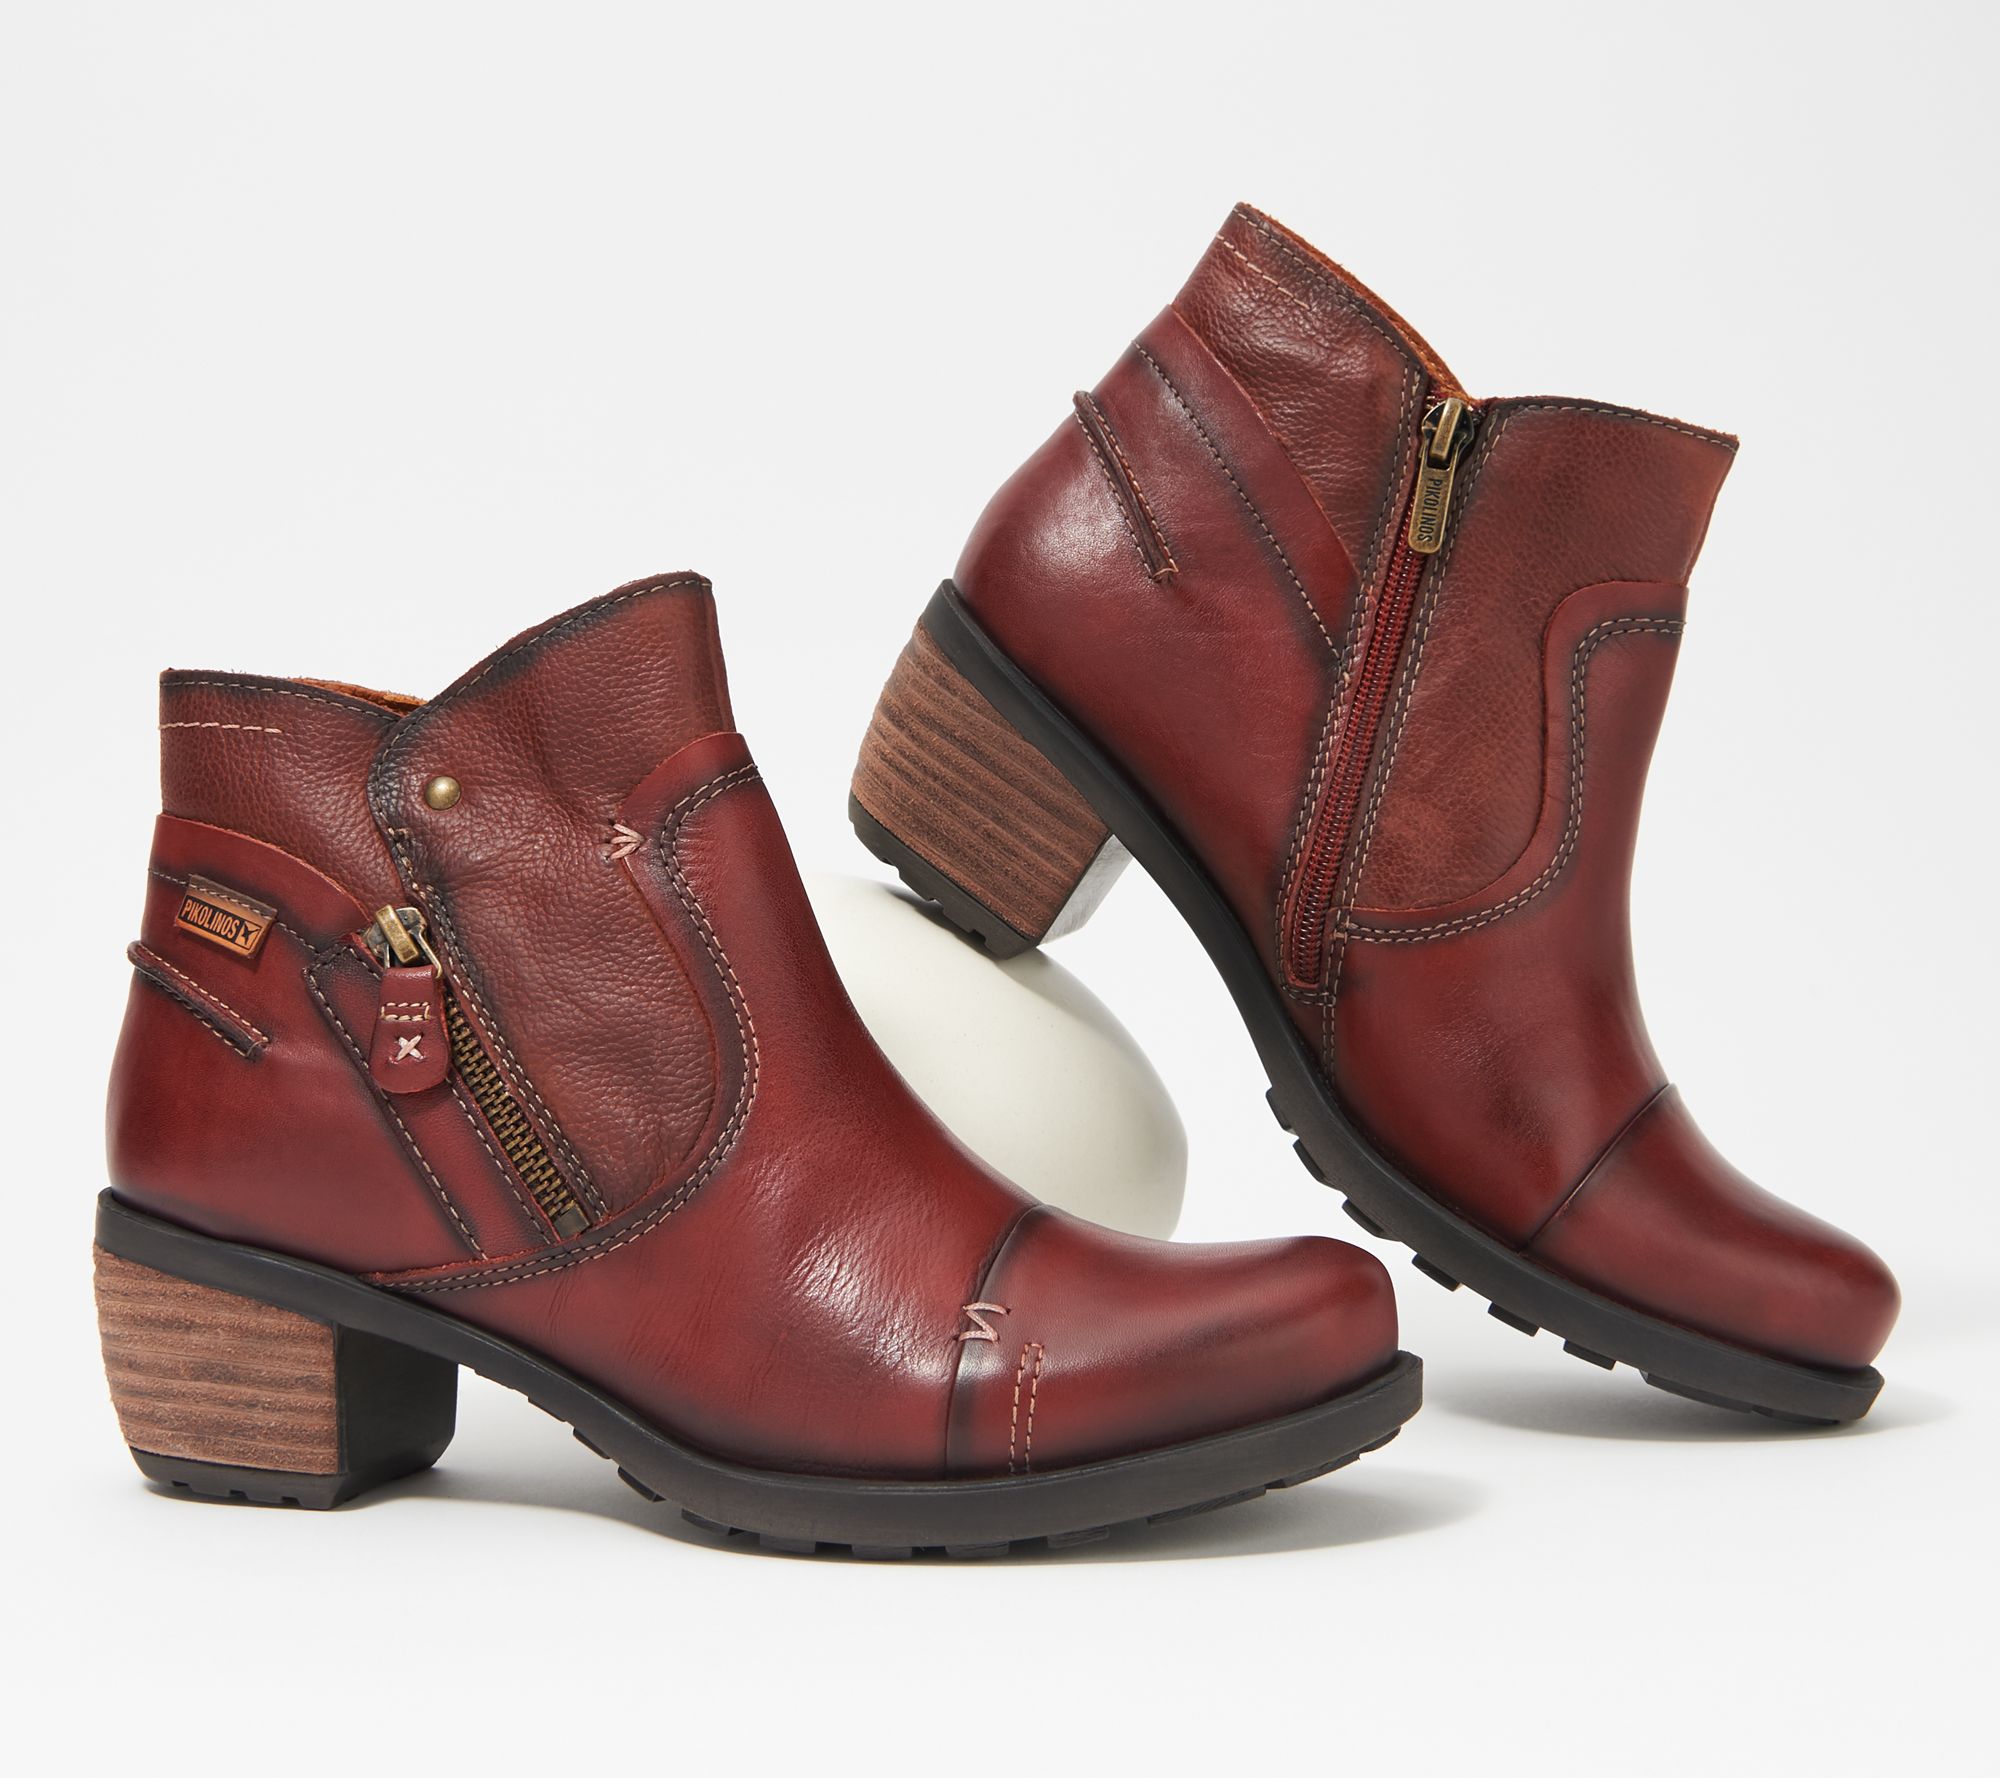 Pikolinos Leather Side Zip Ankle Boots - QVC.com